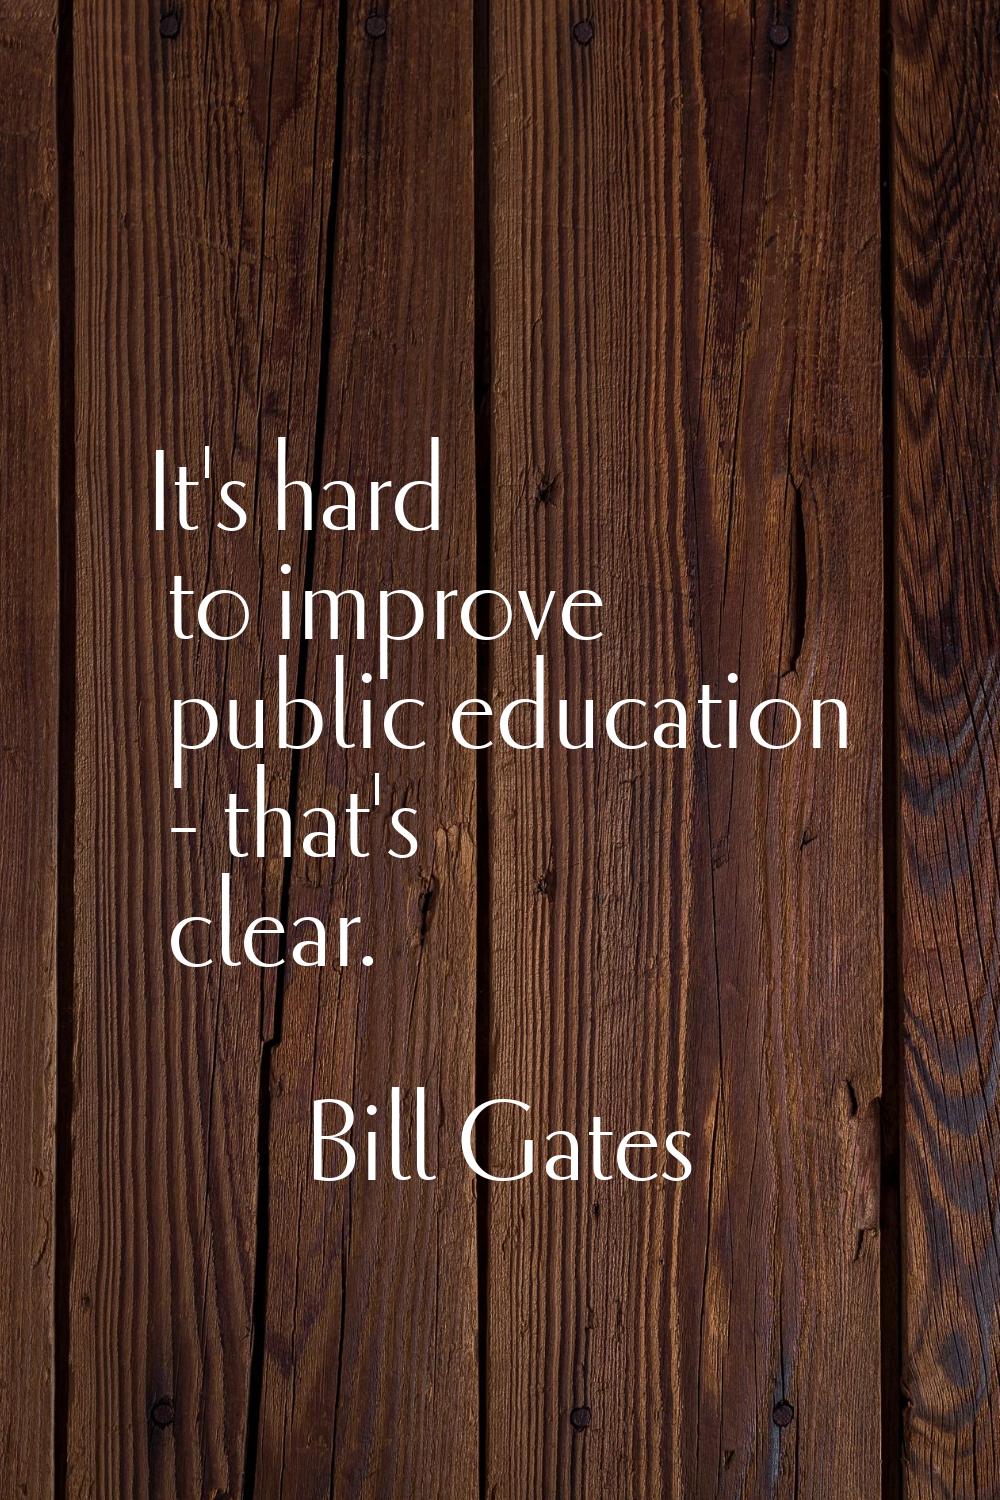 It's hard to improve public education - that's clear.